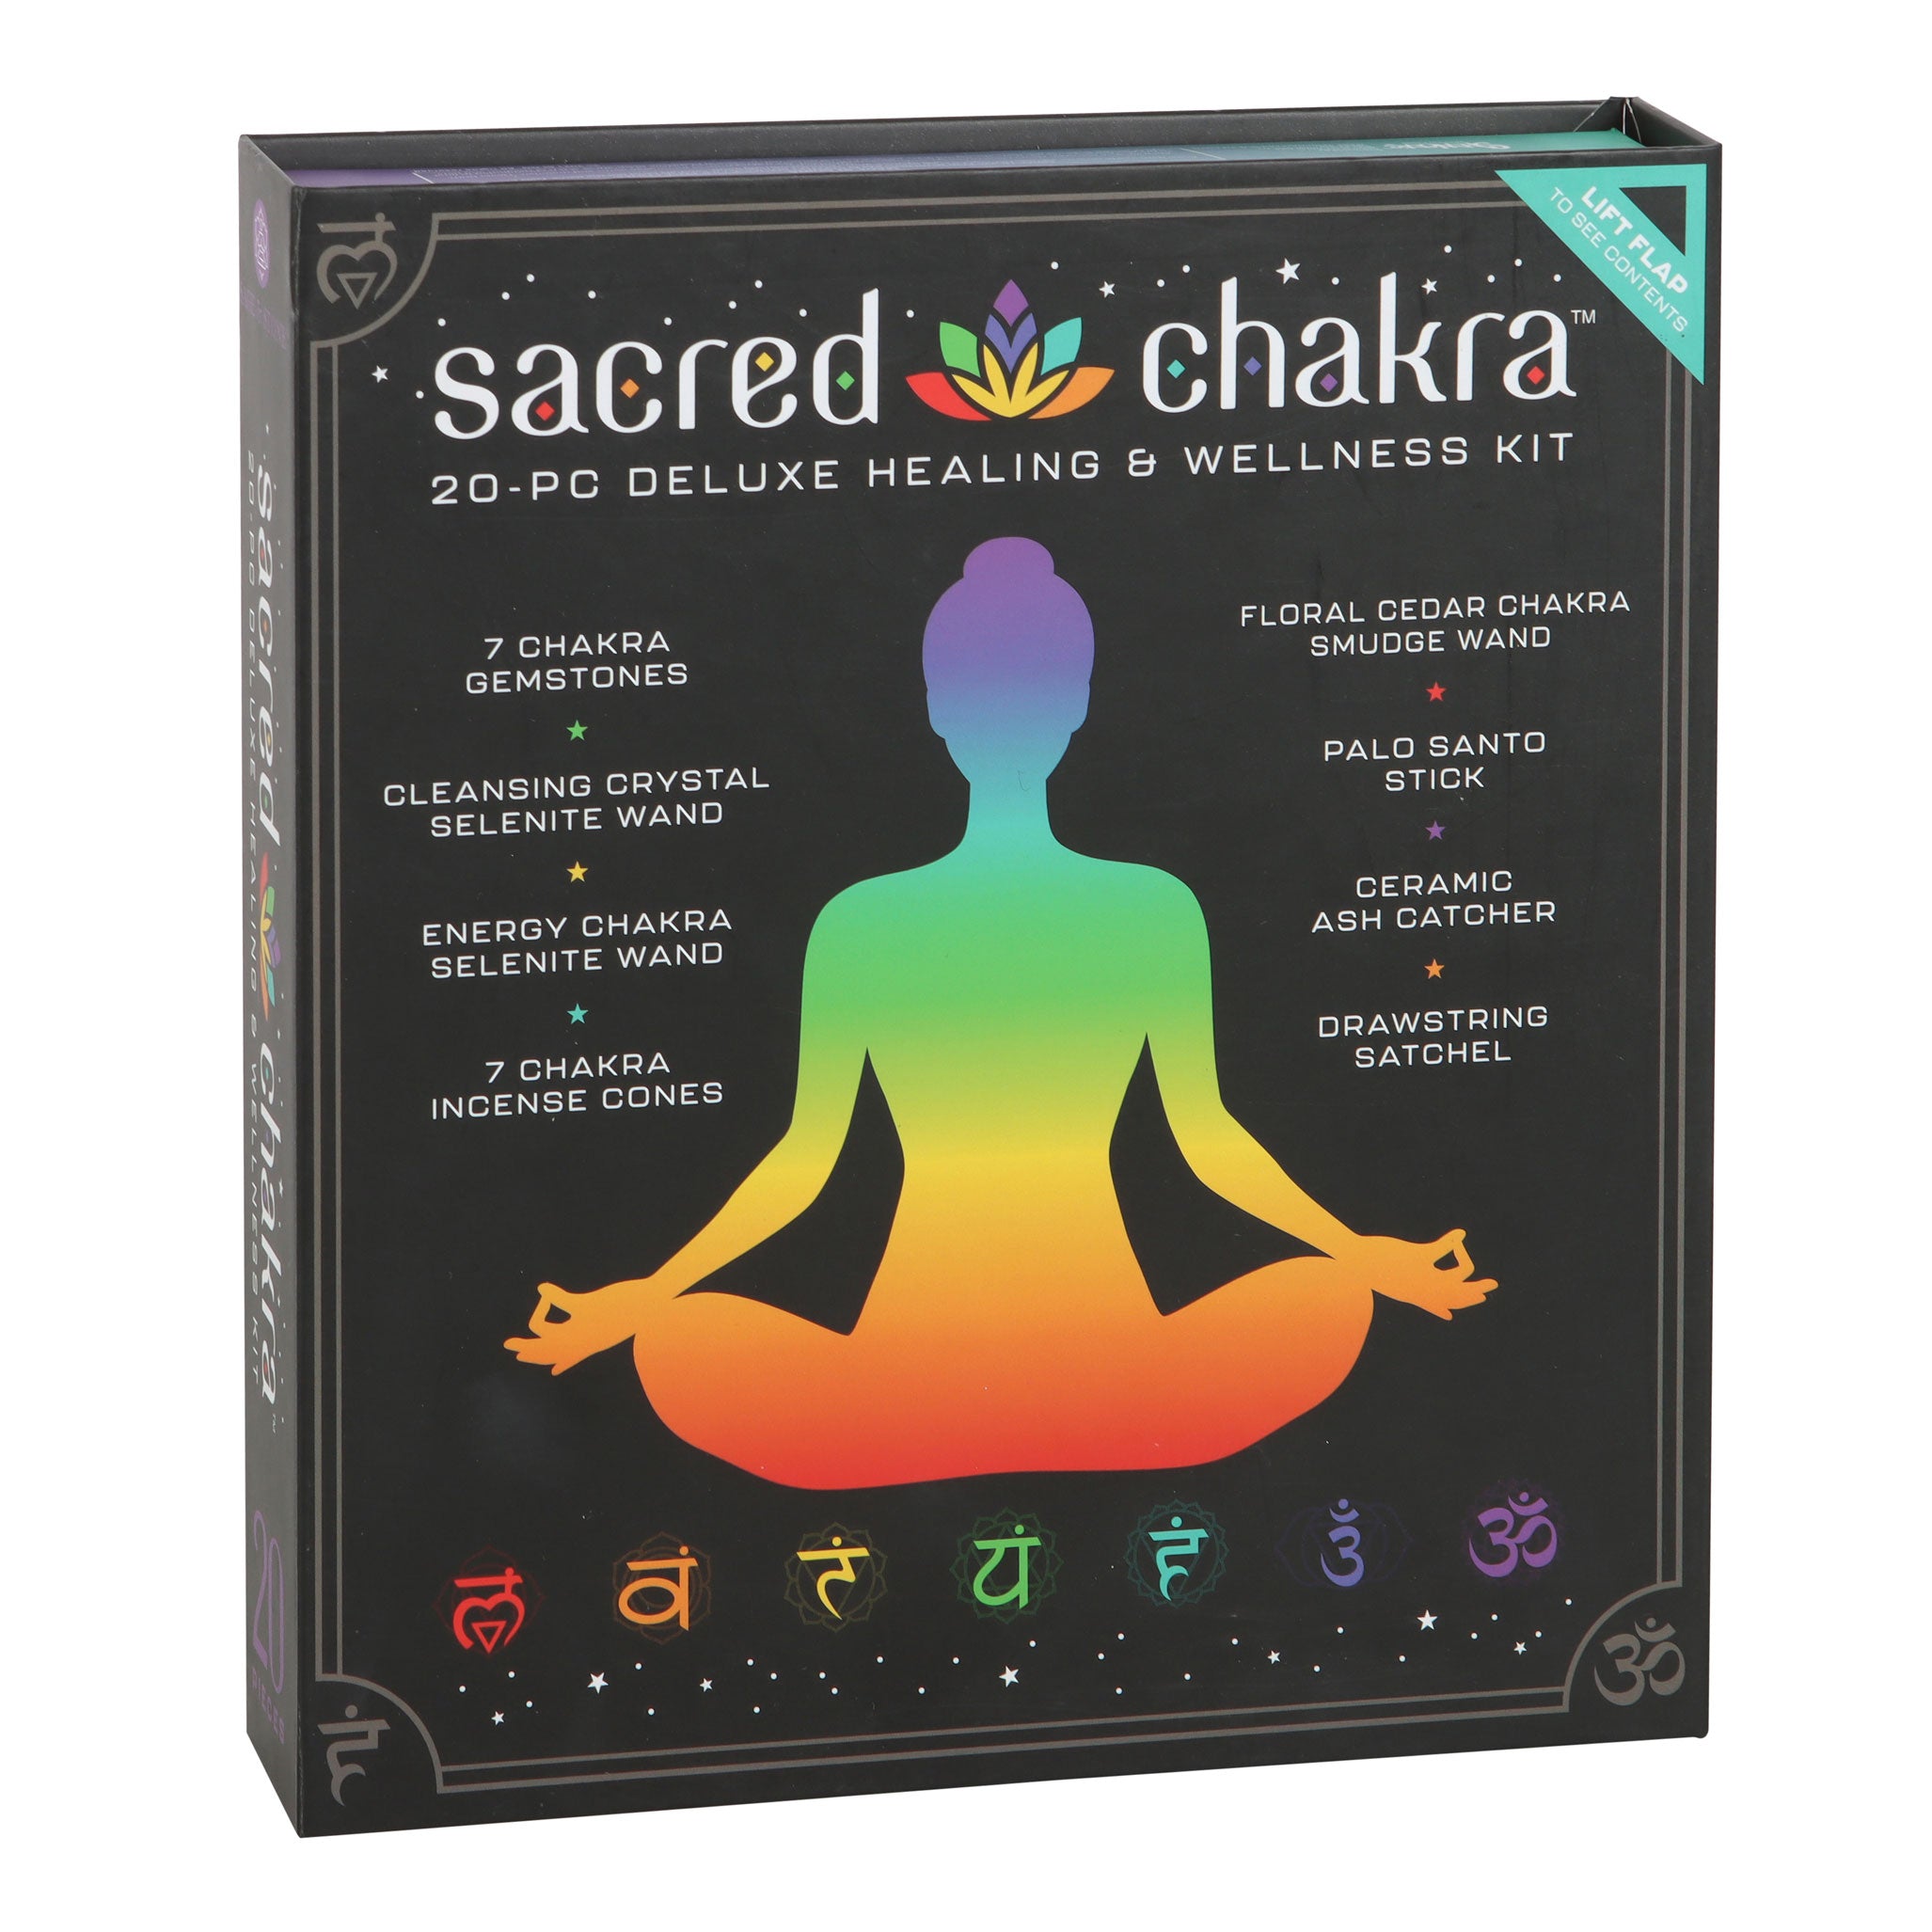 View Sacred Chakra Deluxe Healing and Wellness Kit information